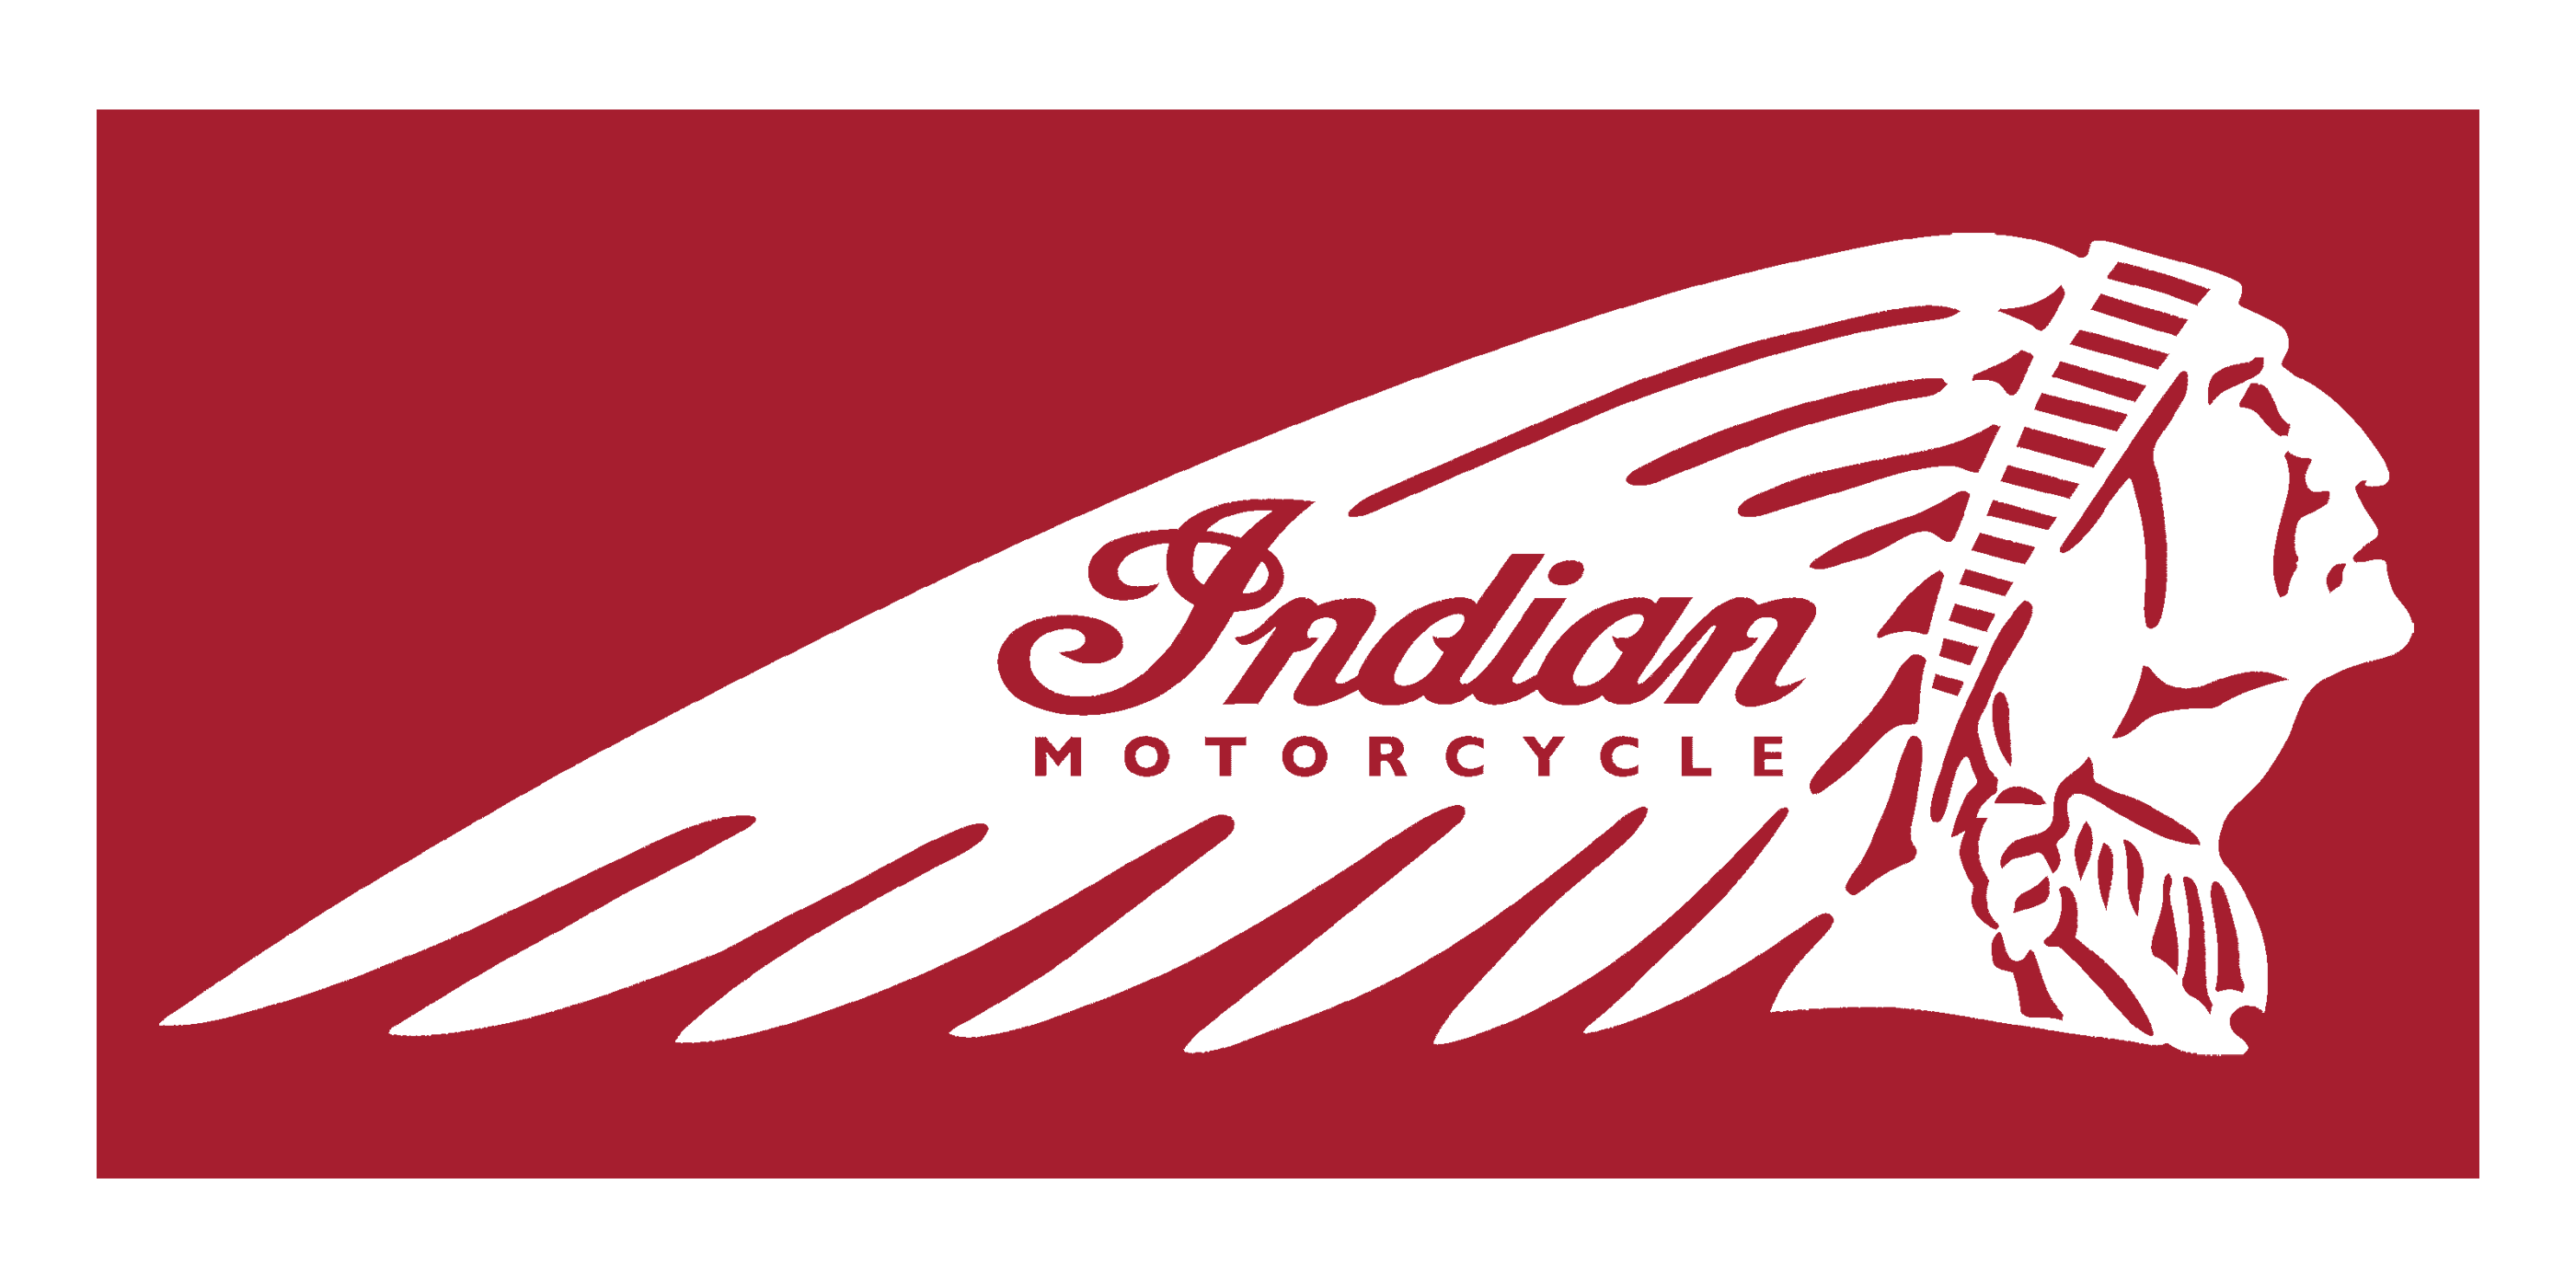  Indian motorcycle logo  history and Meaning bike emblem